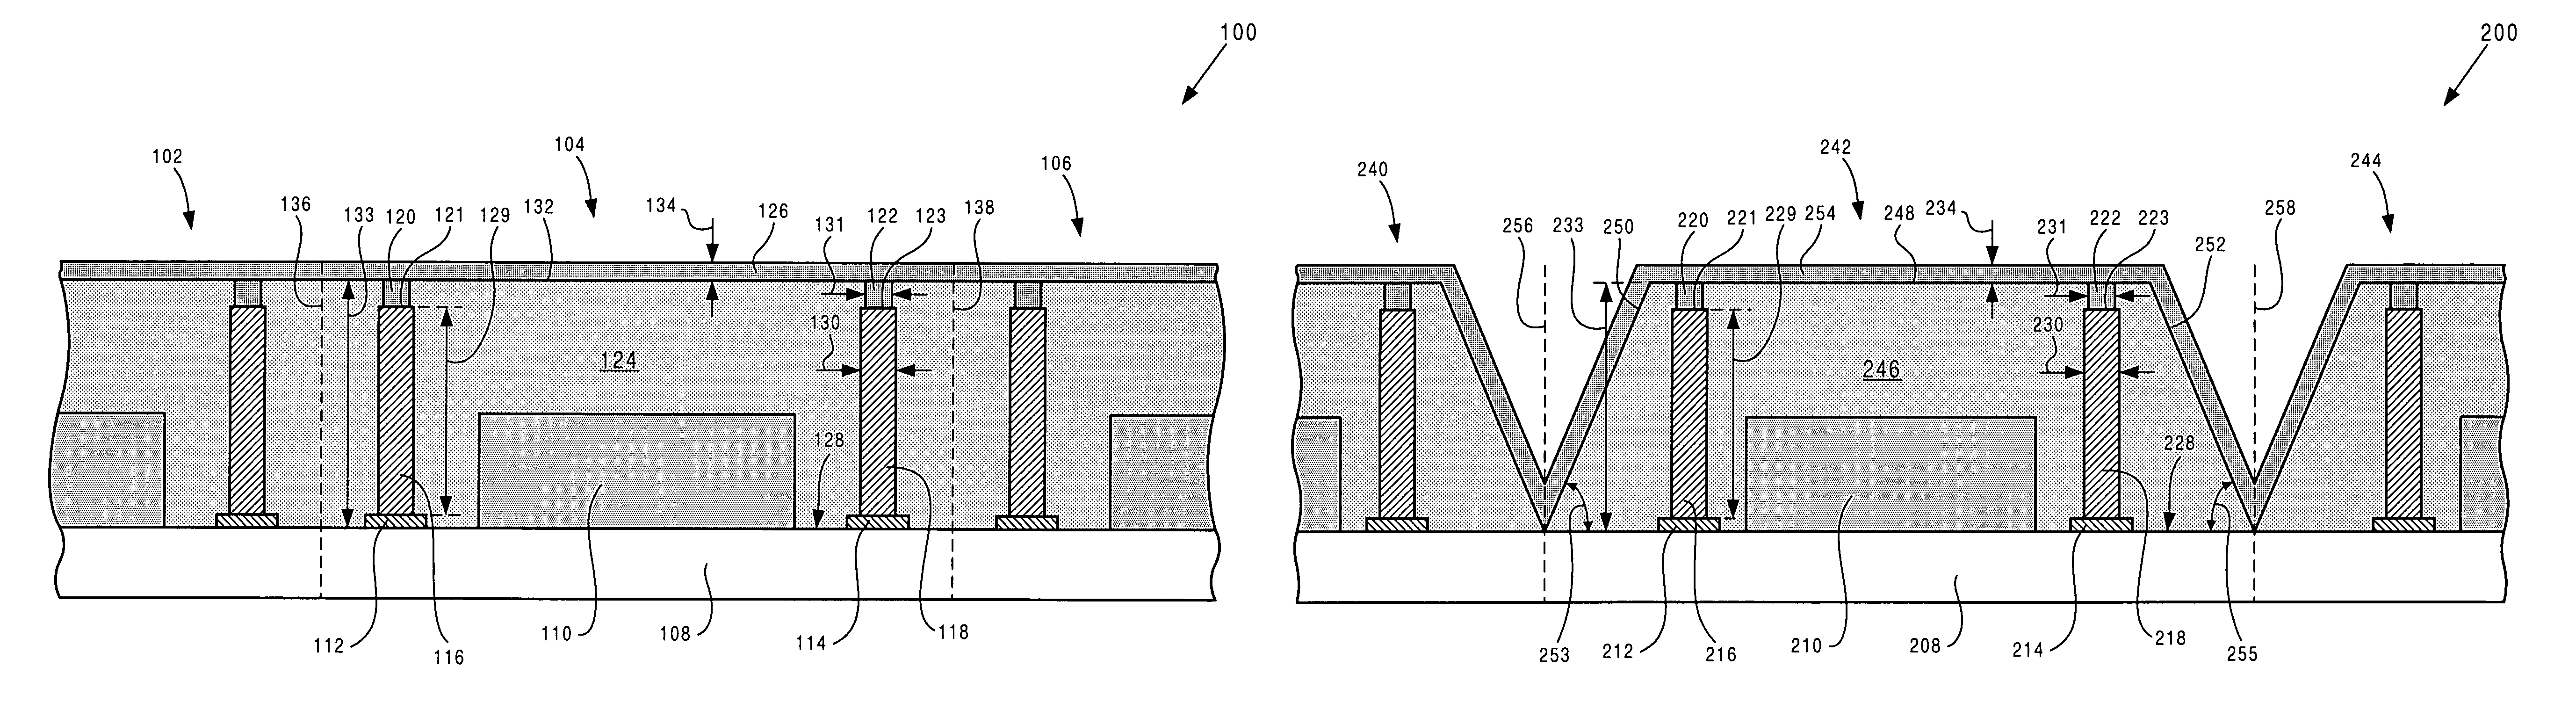 Overmolded semiconductor package with an integrated EMI and RFI shield